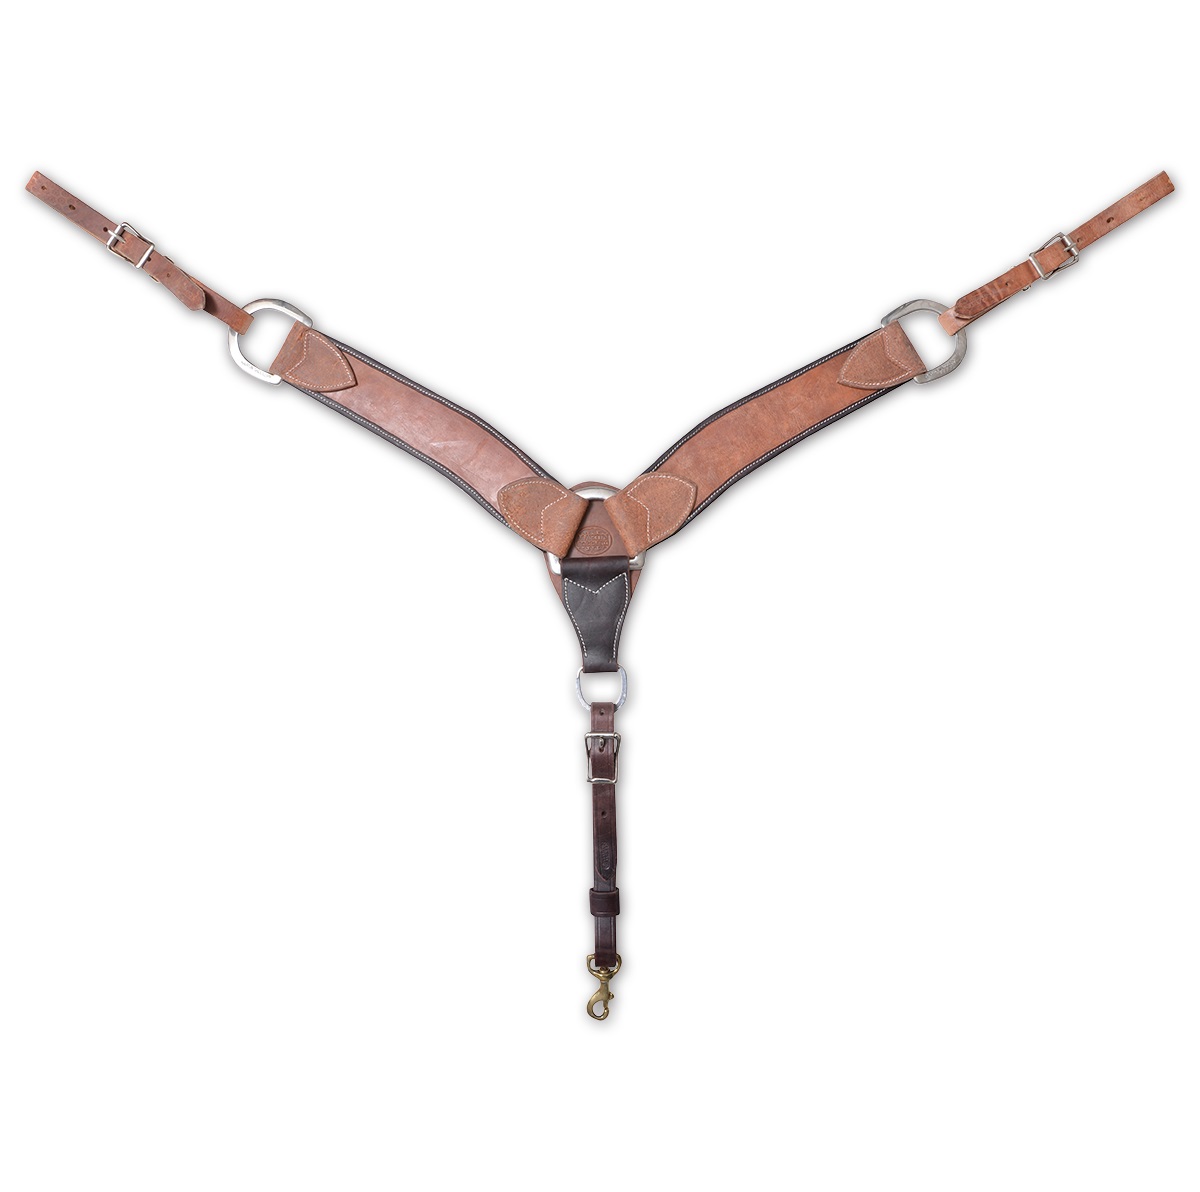 2 3/4"  Harness Leather Breastcollar by Martin Saddlery